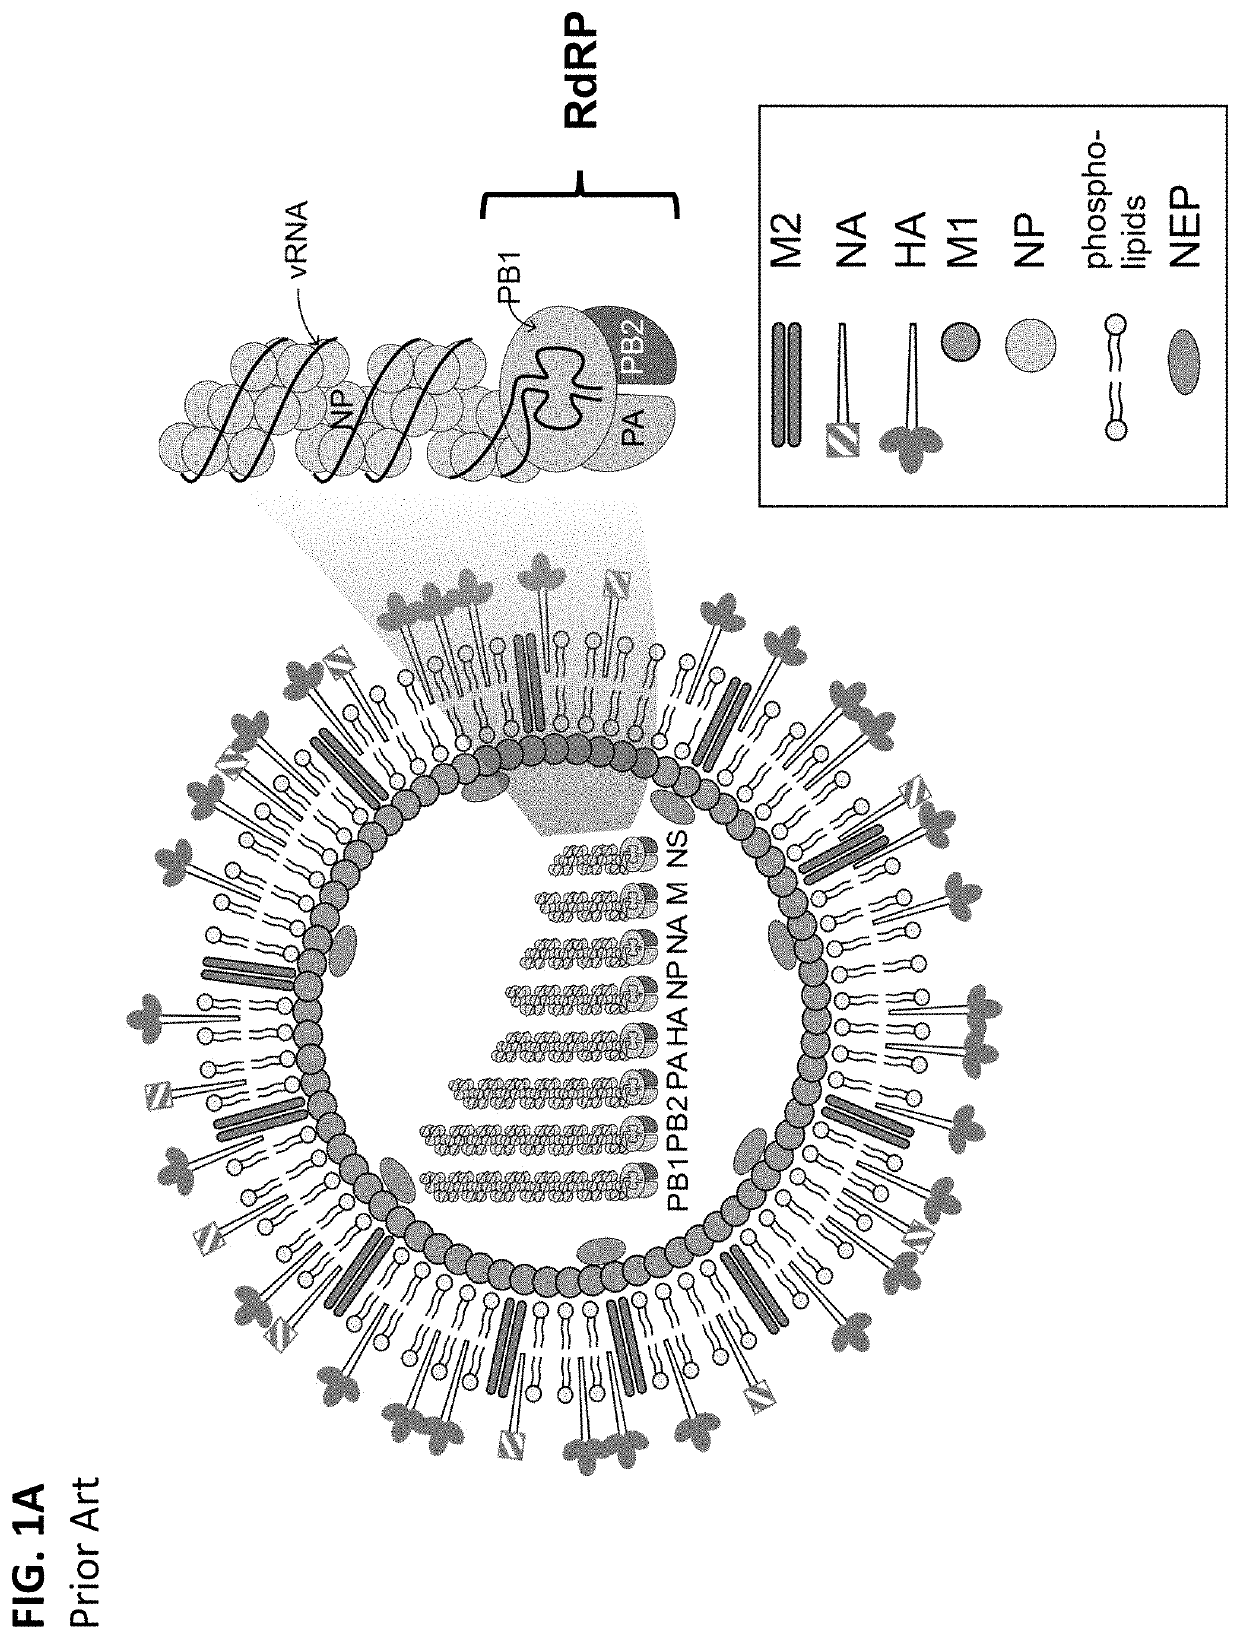 Systems, methods, and cell lines for generating influenza virus or influenza virus proteins